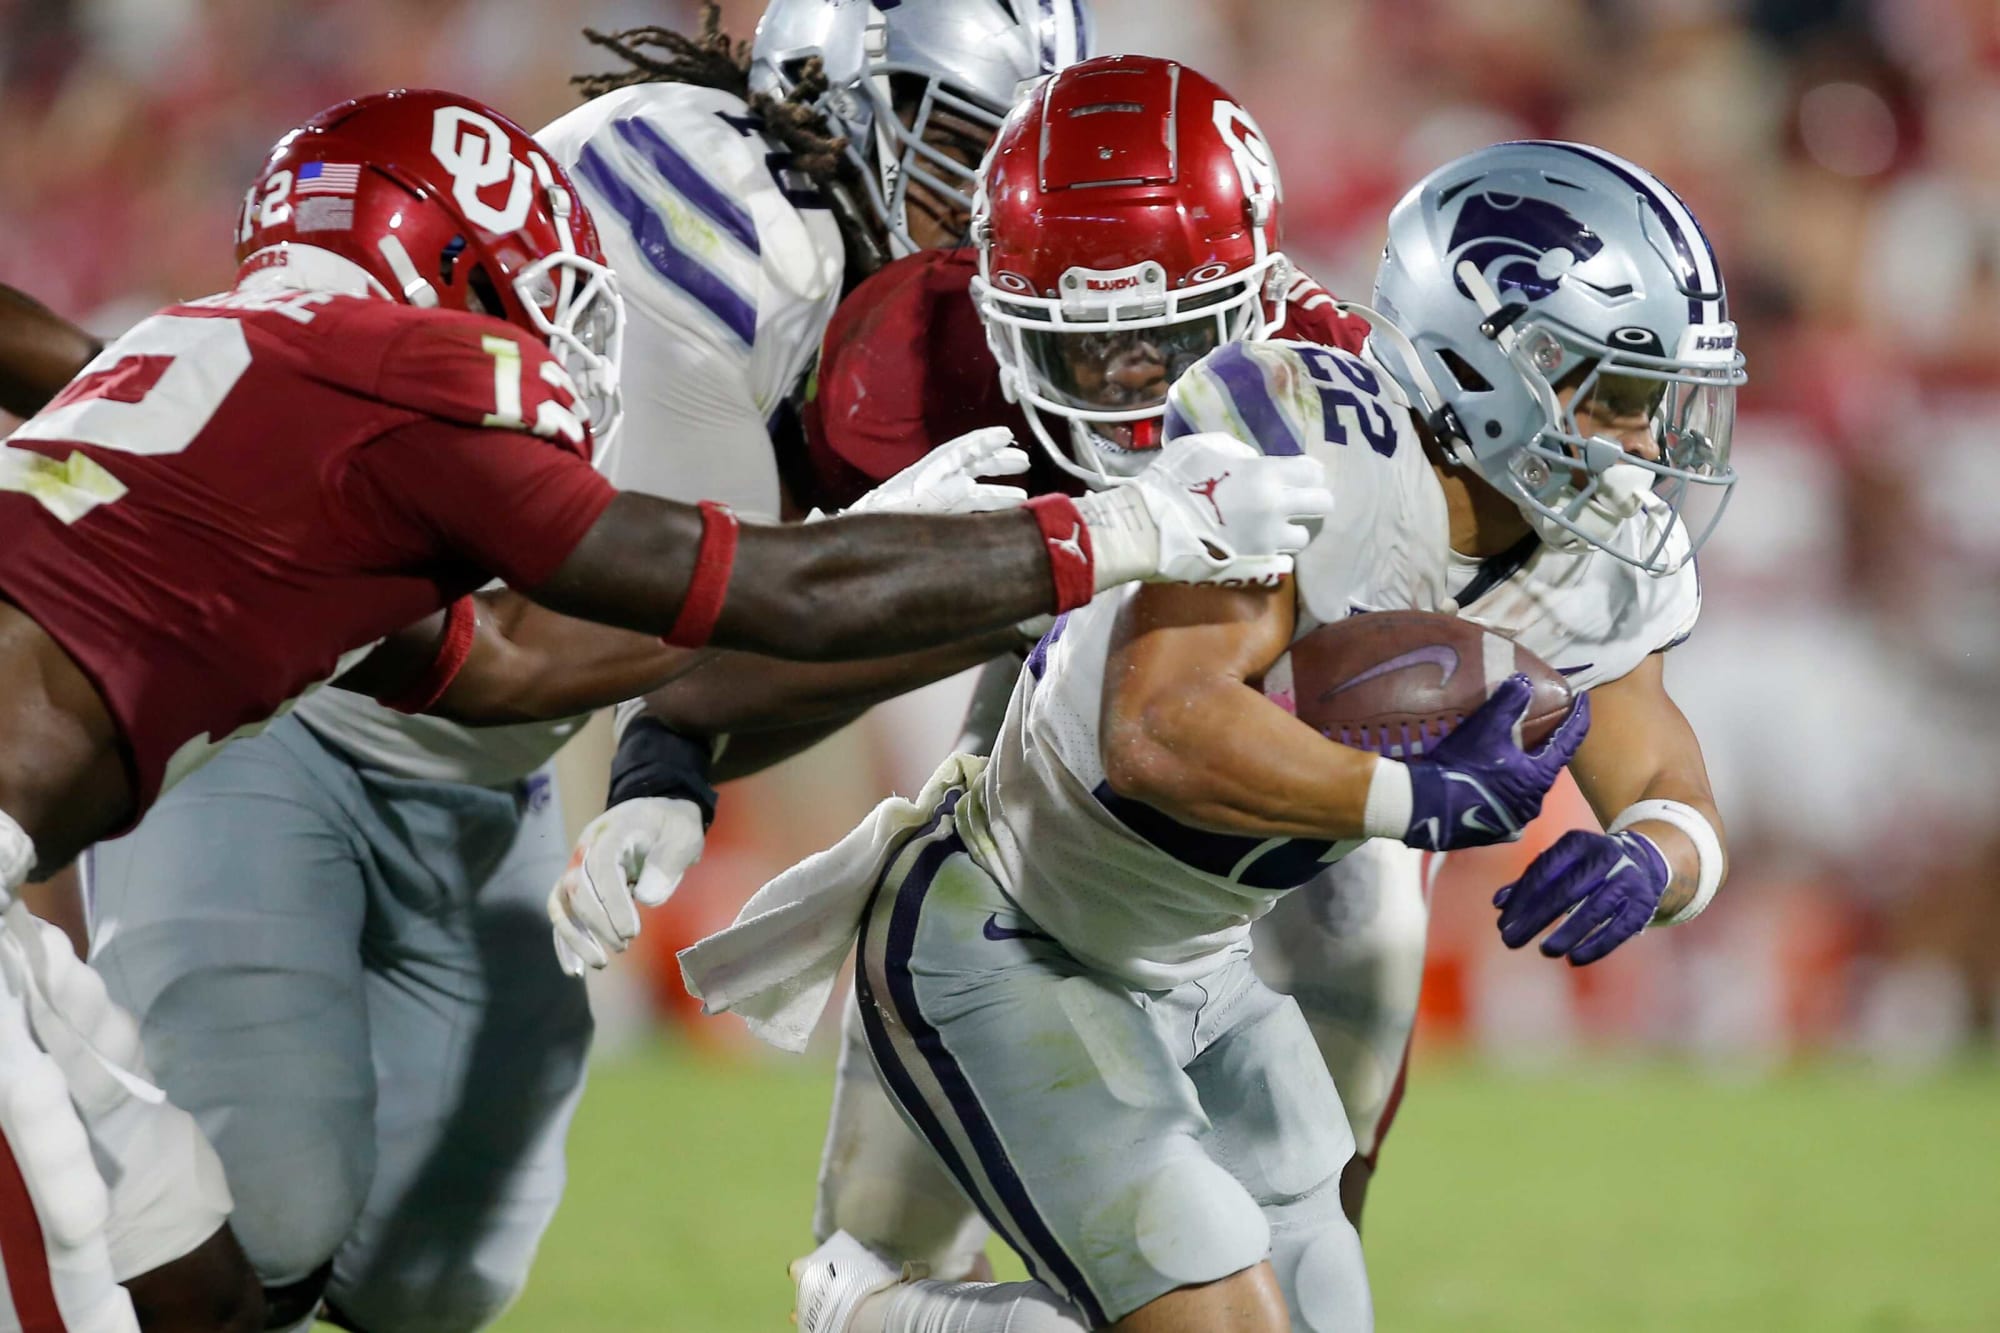 Oklahoma football: Can Sooners shore up defense in time to throttle TCU, save season?